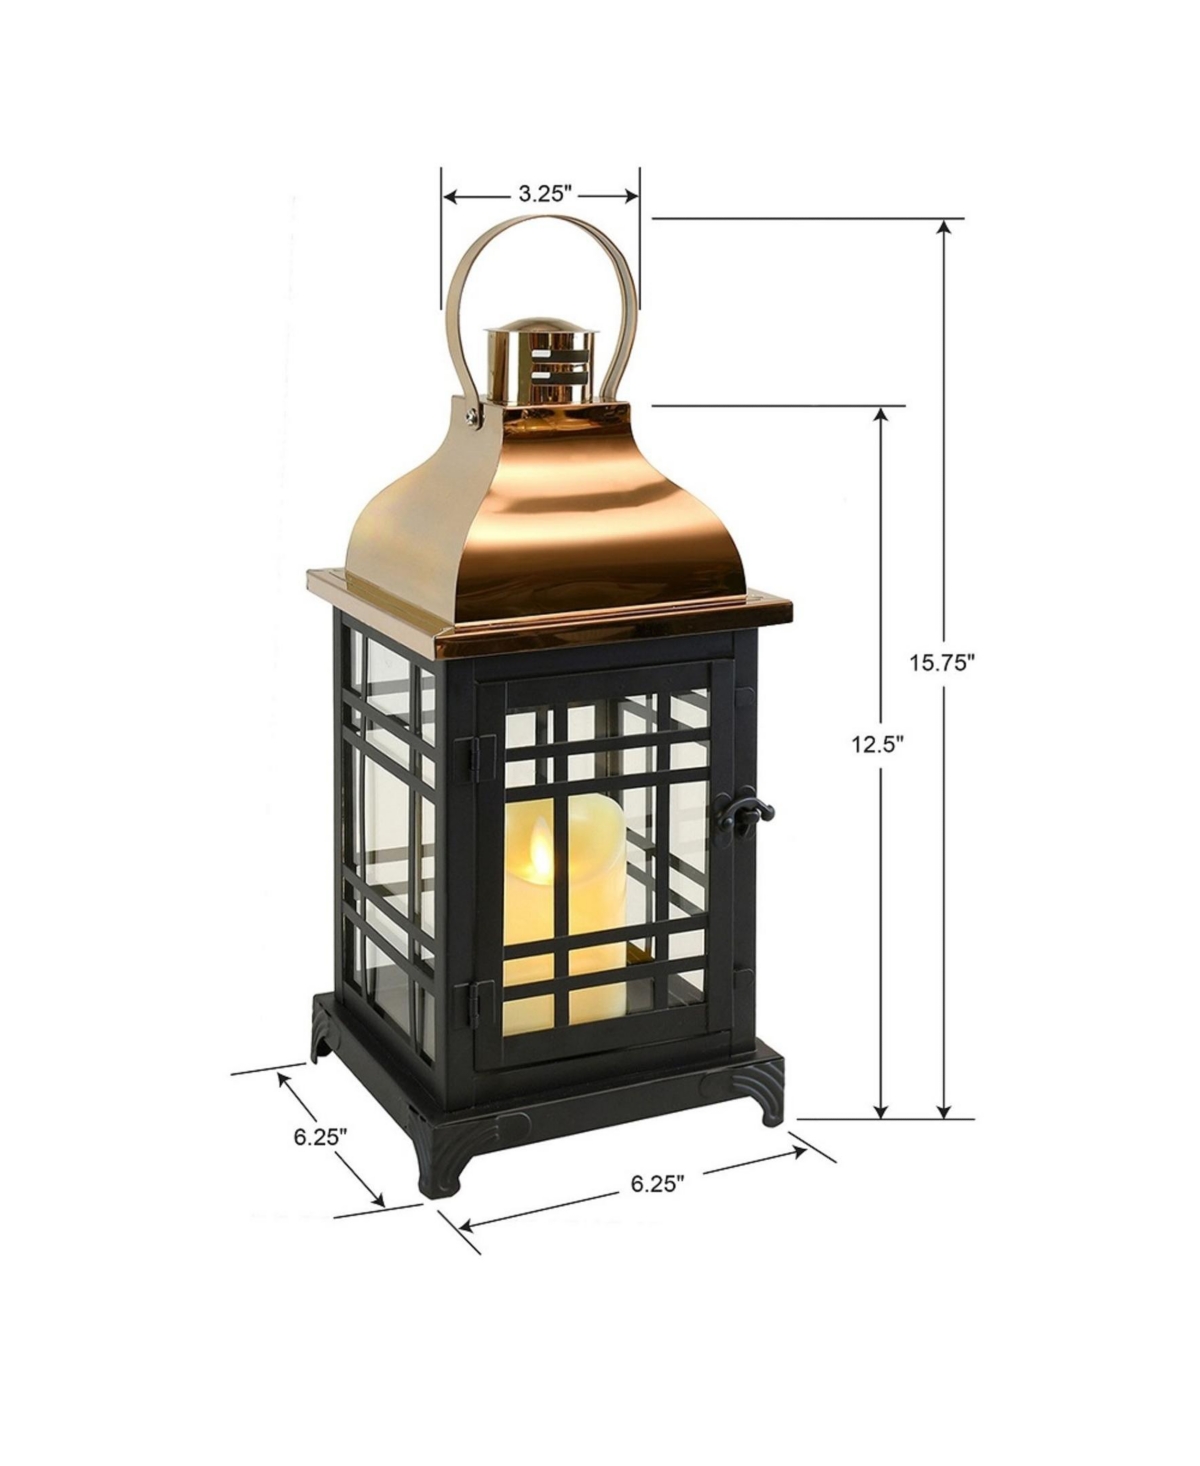 Jh Specialties Inc/lumabase Metal Lantern With Moving Flame Led Candle - With Copper Roof In Black And Copper